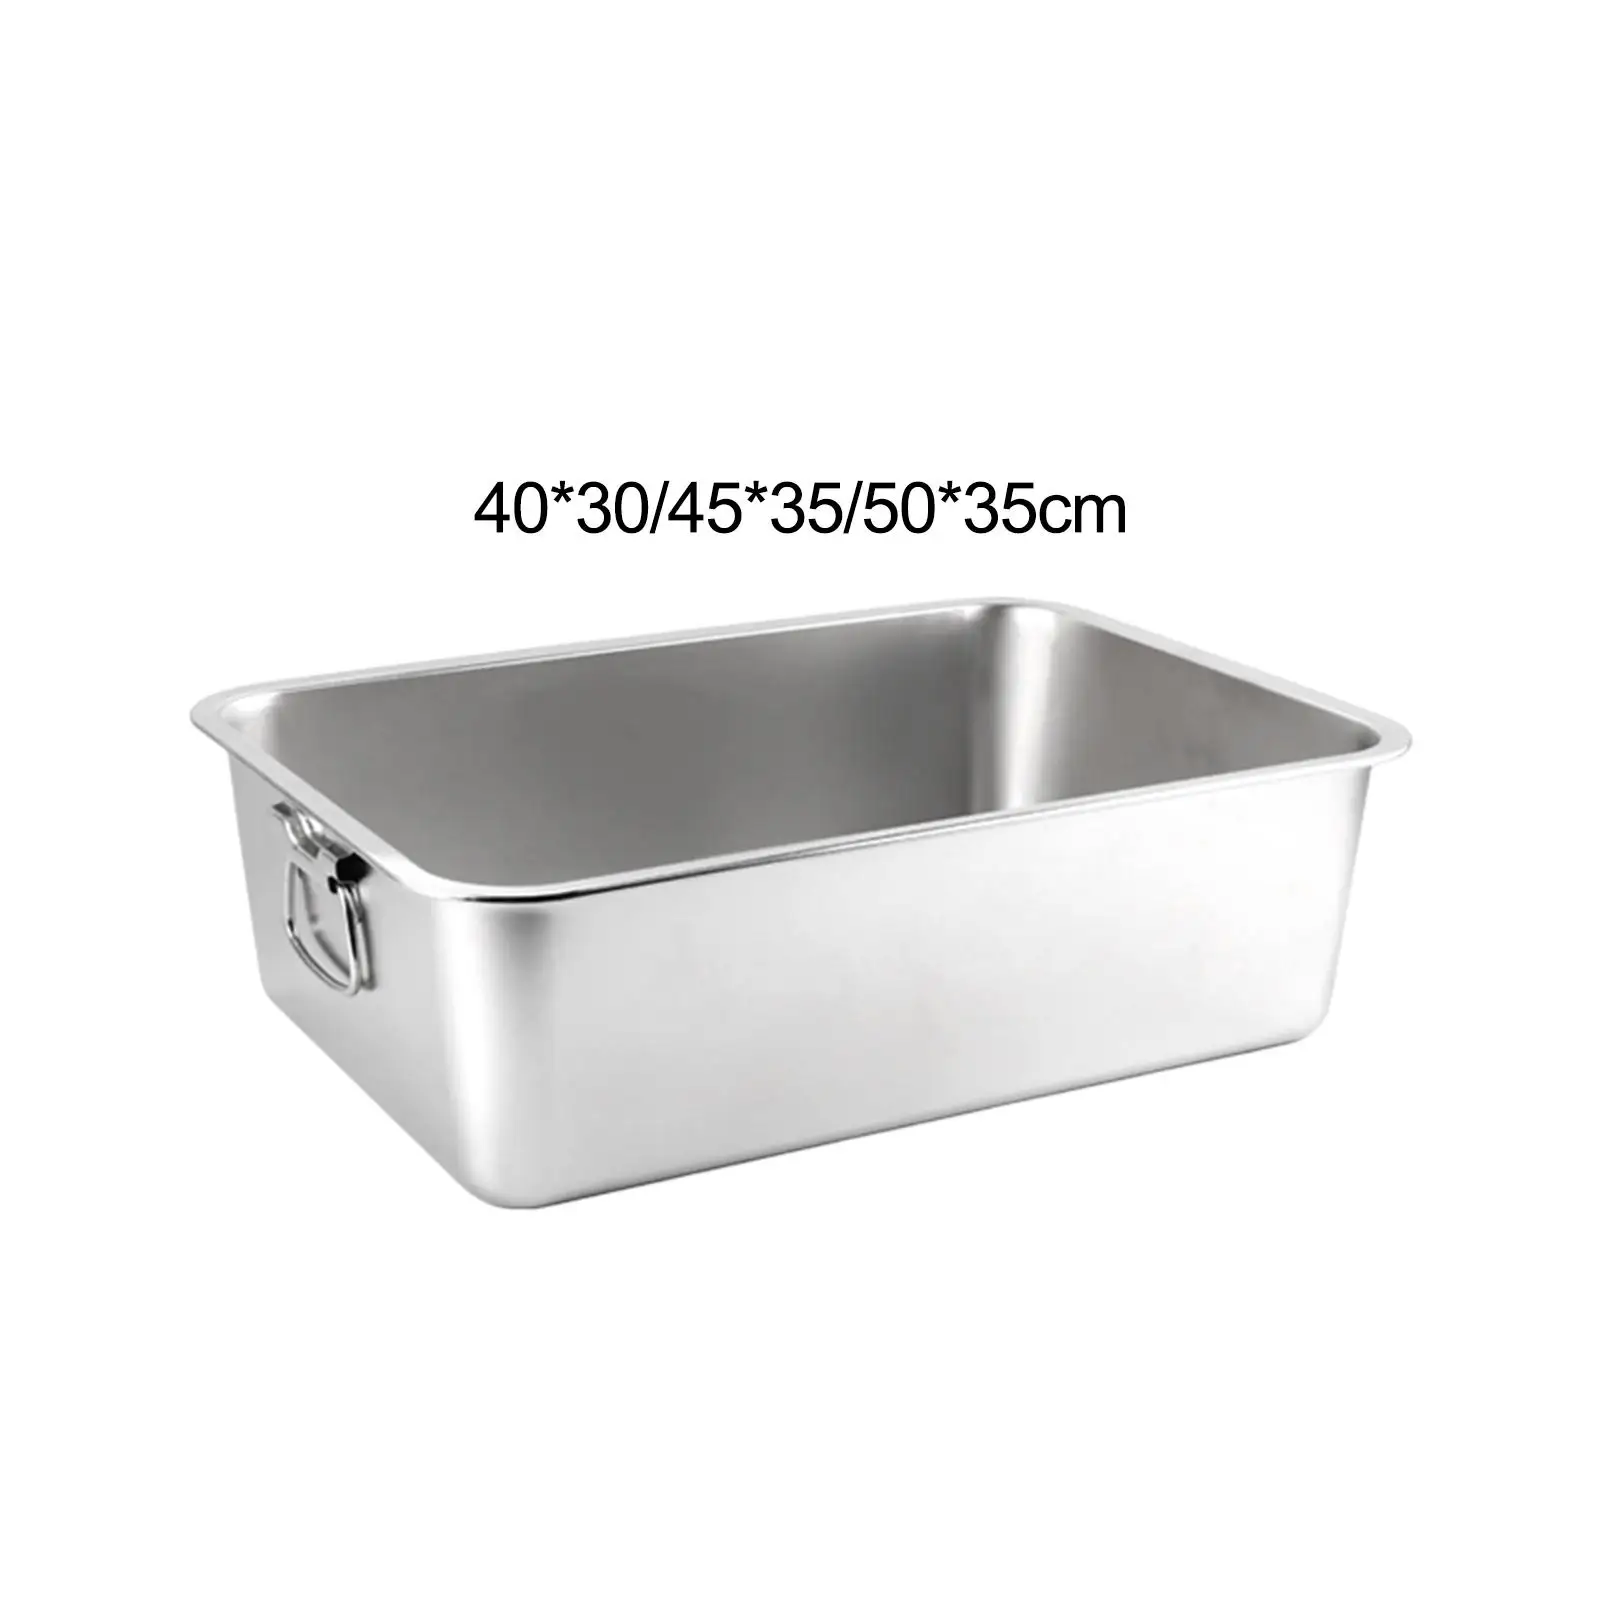 Open Litter Box for Indoor Cats, Kitten Potty Toilet Stainless Steel for Puppy Small Medium Large Cats Bunny Rabbit